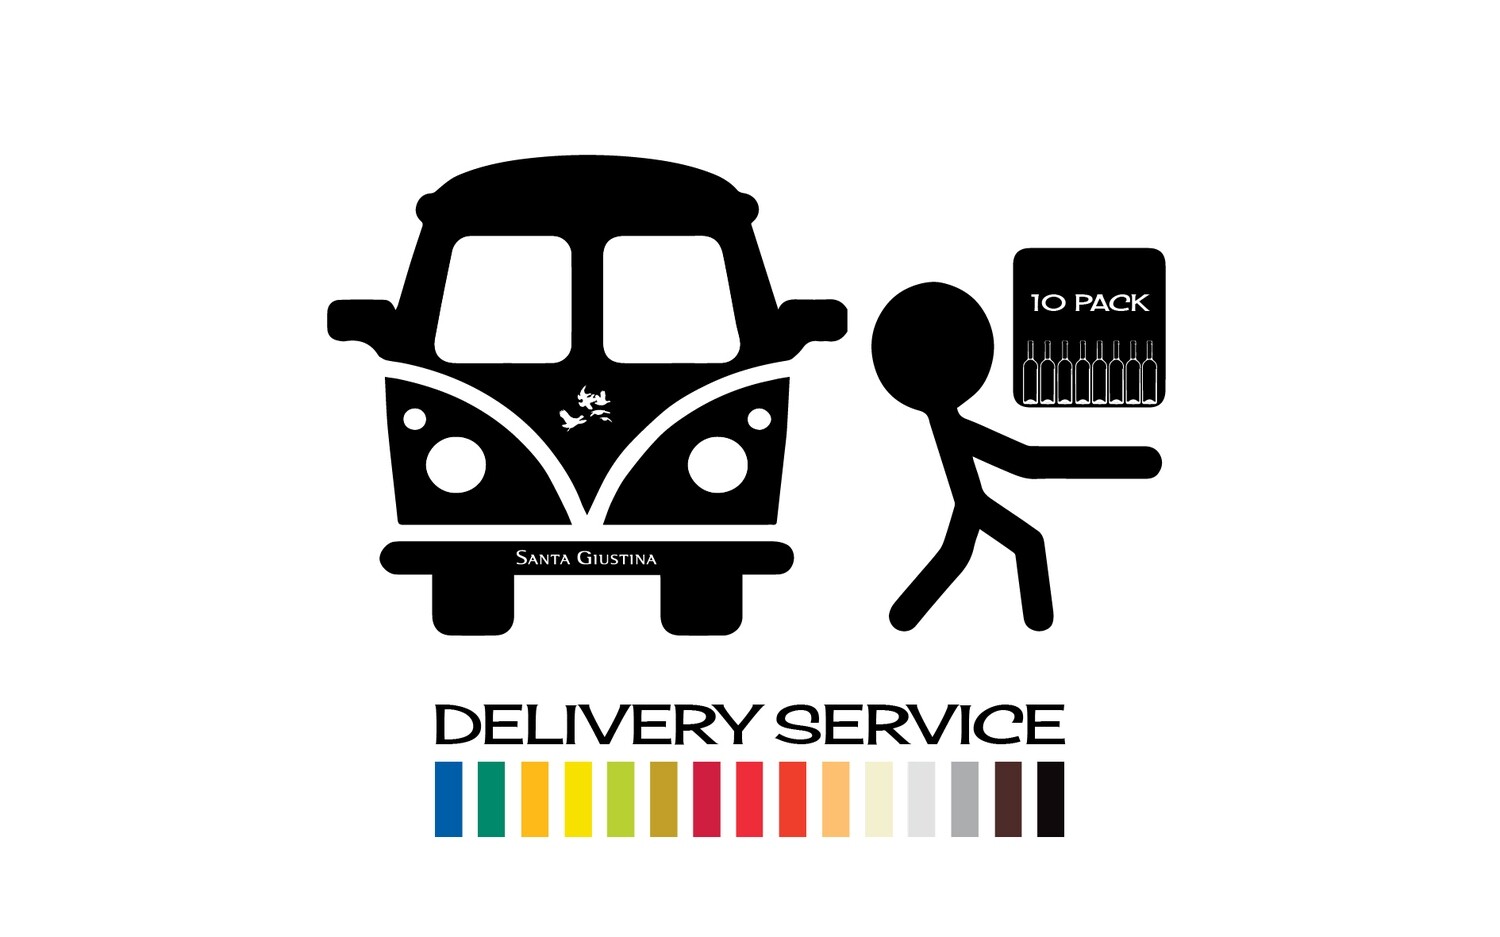 DELIVERY SERVICE 10-PACK